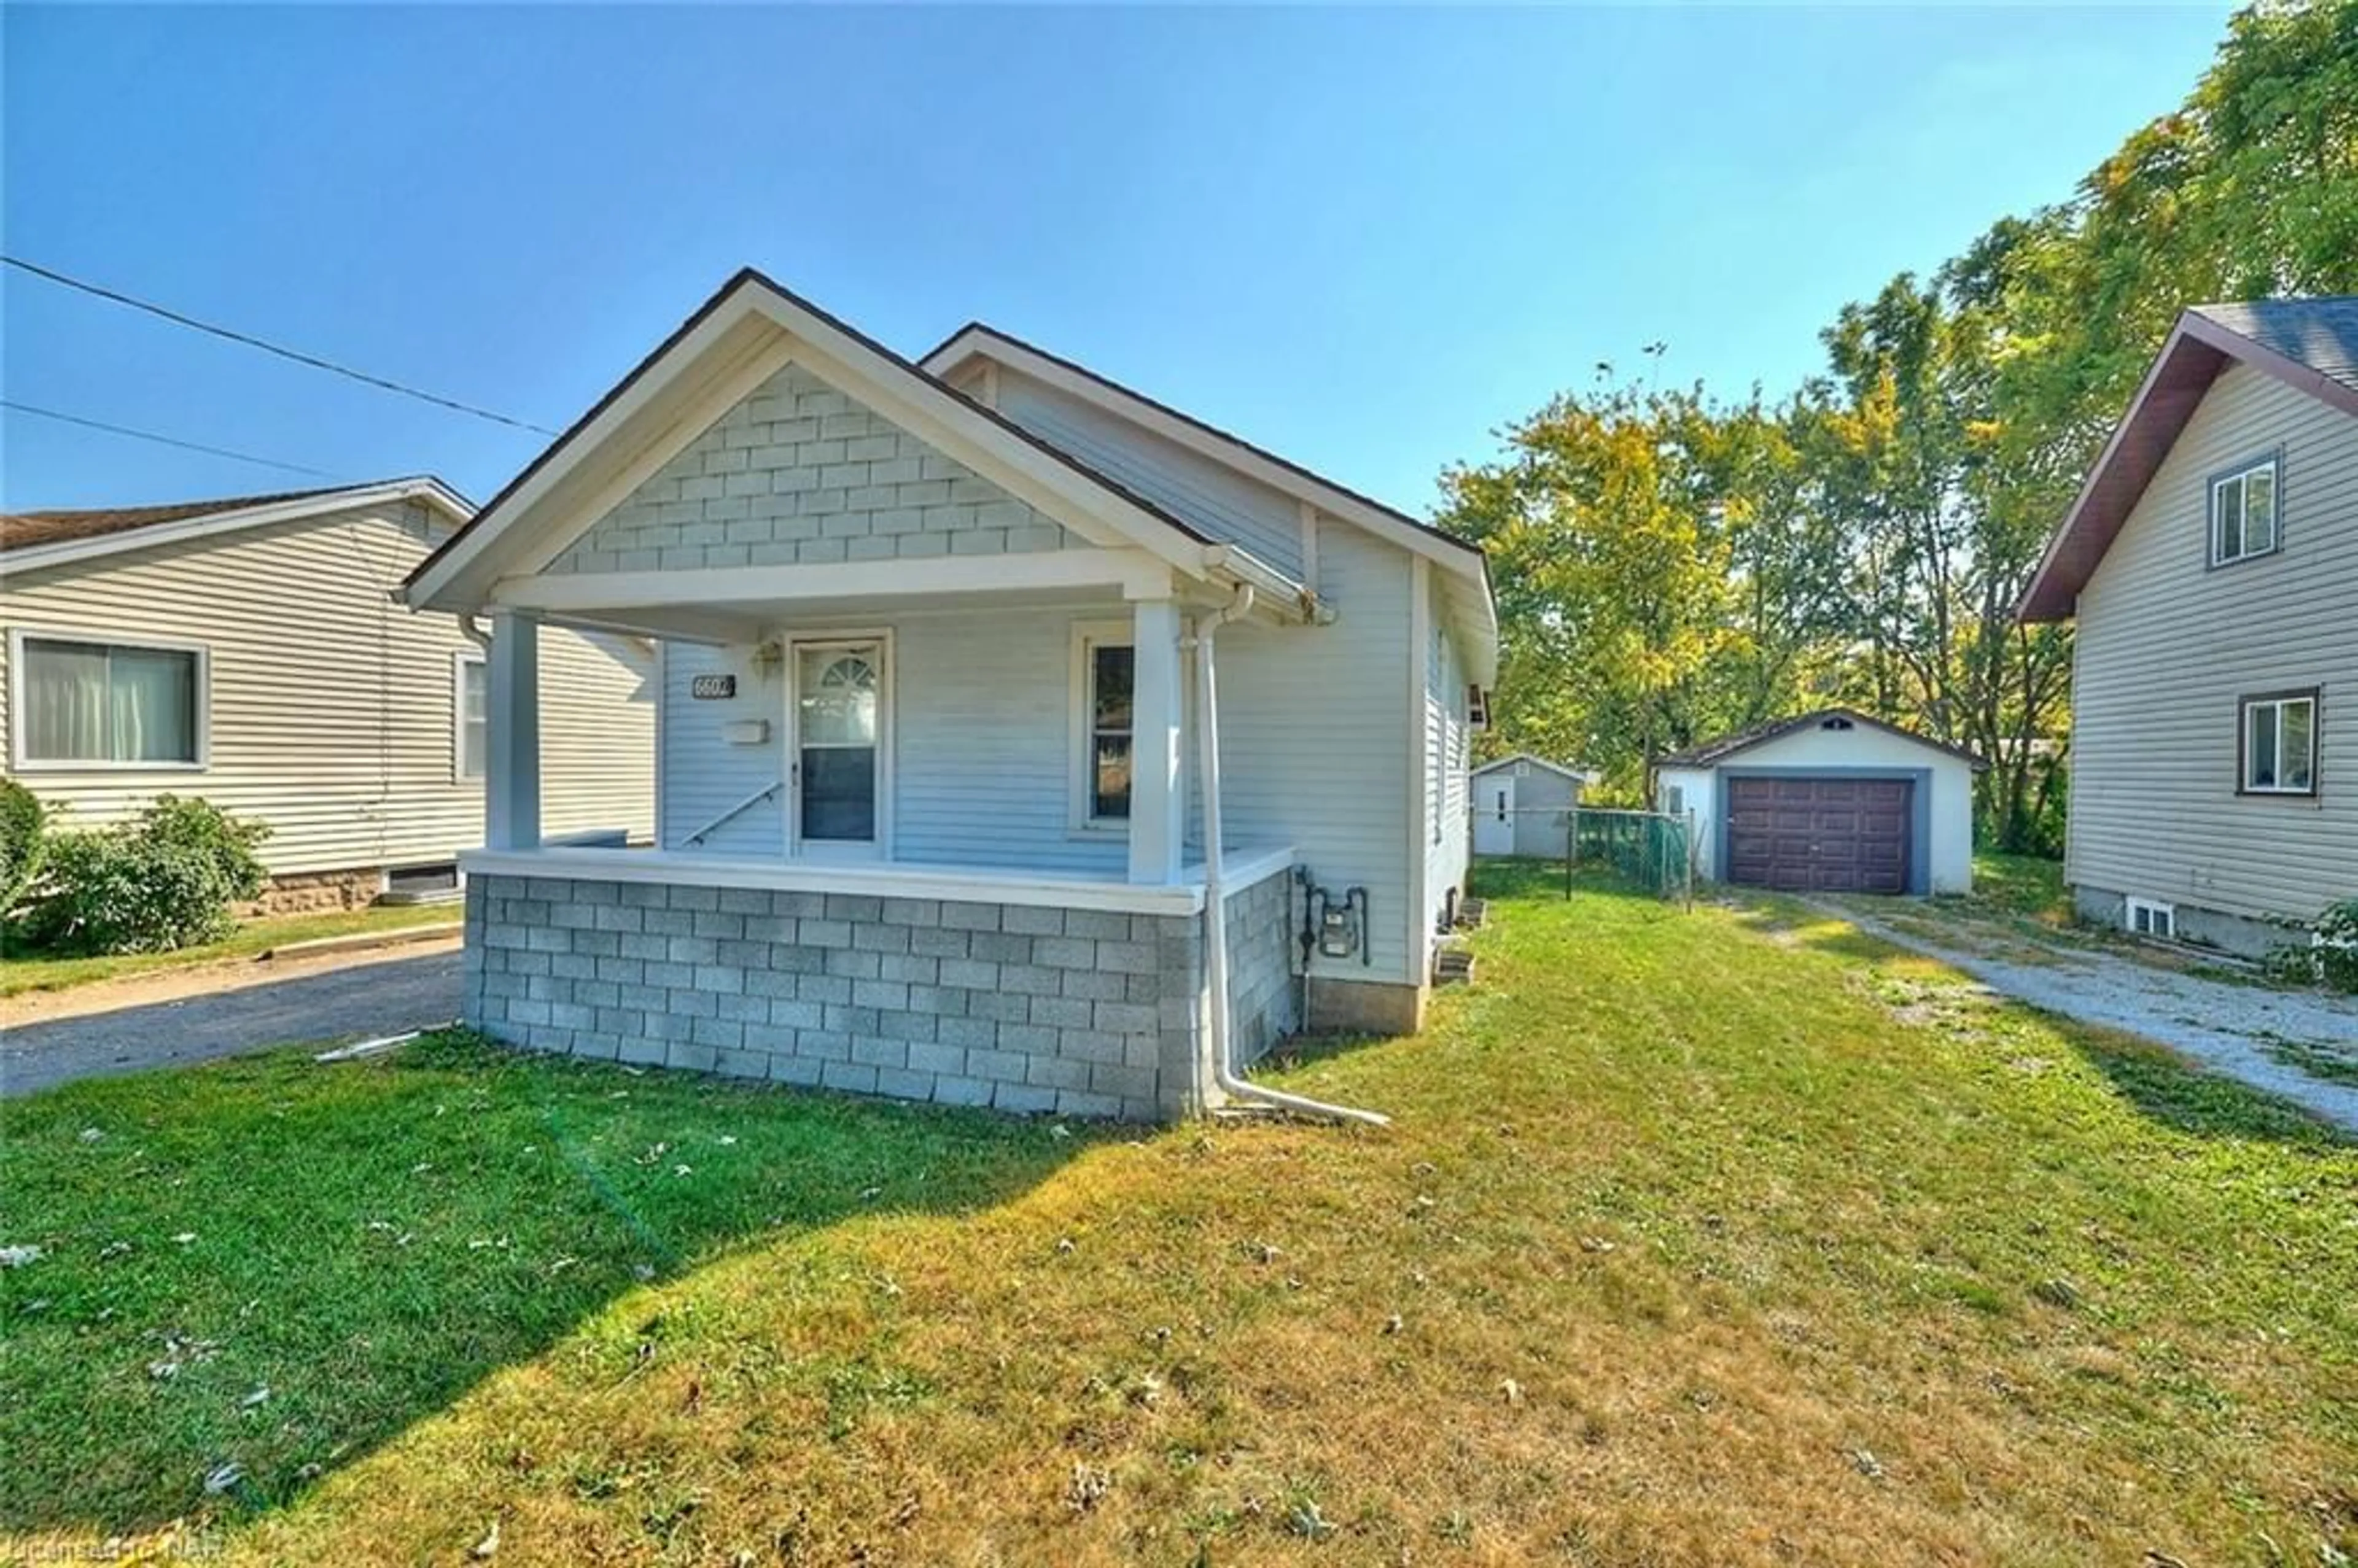 Frontside or backside of a home for 6602 Barker St, Niagara Falls Ontario L2G 1Y8